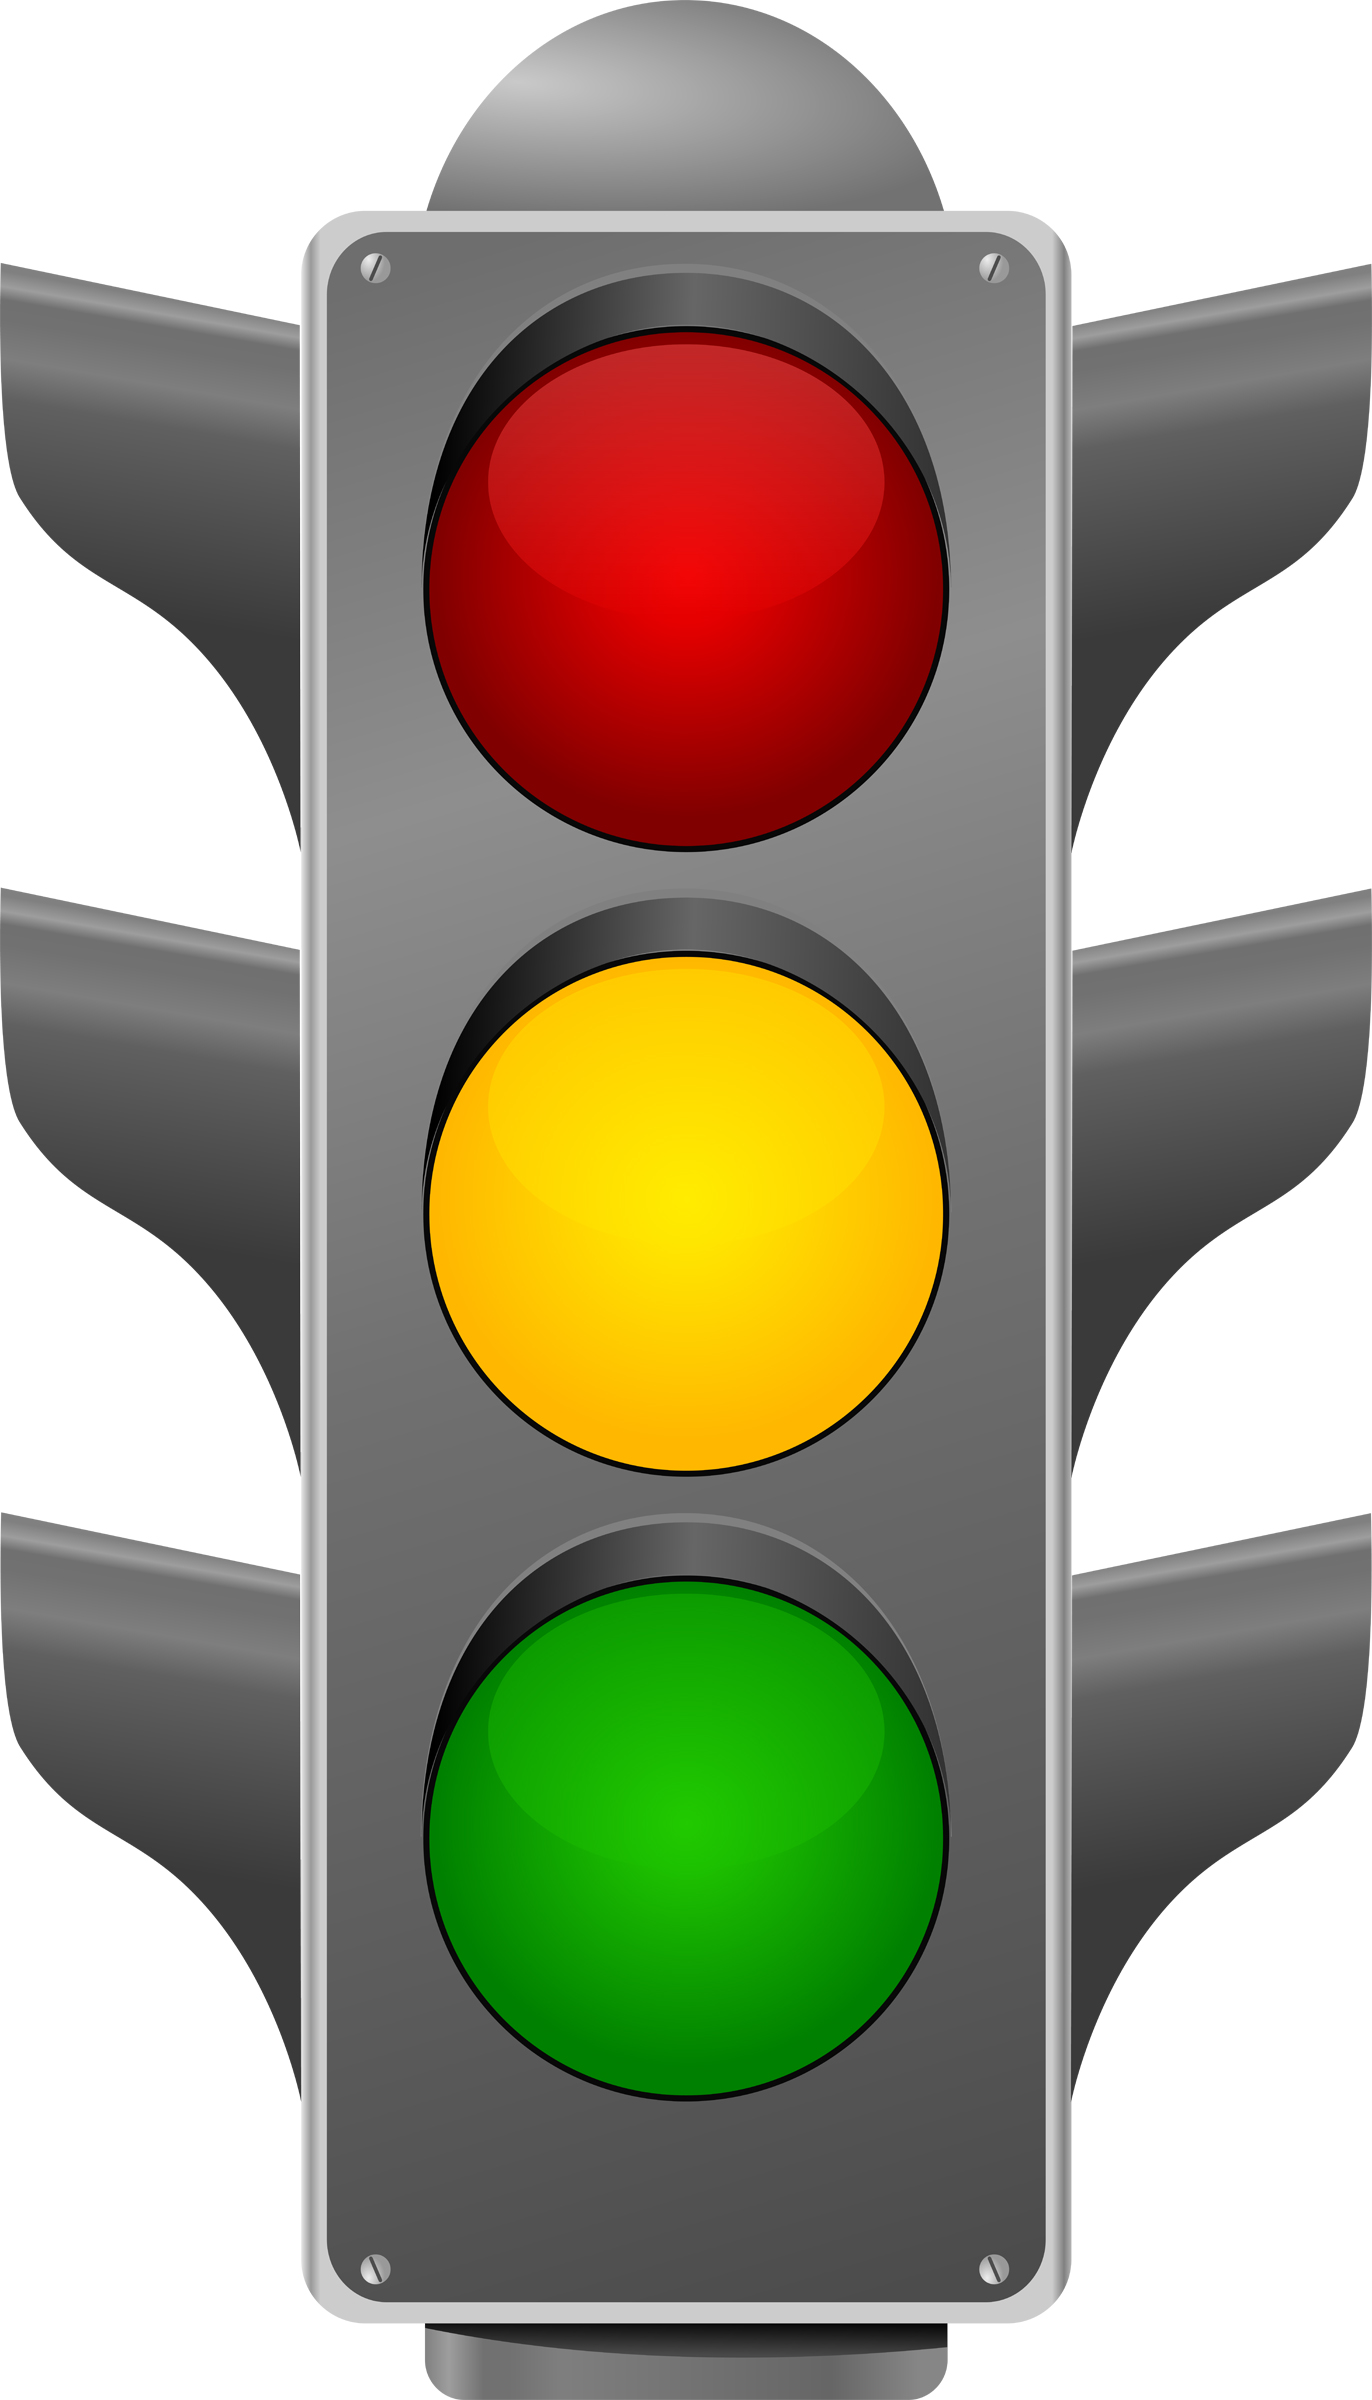 Free Traffic Light Cliparts, Download Free Clip Art, Free.